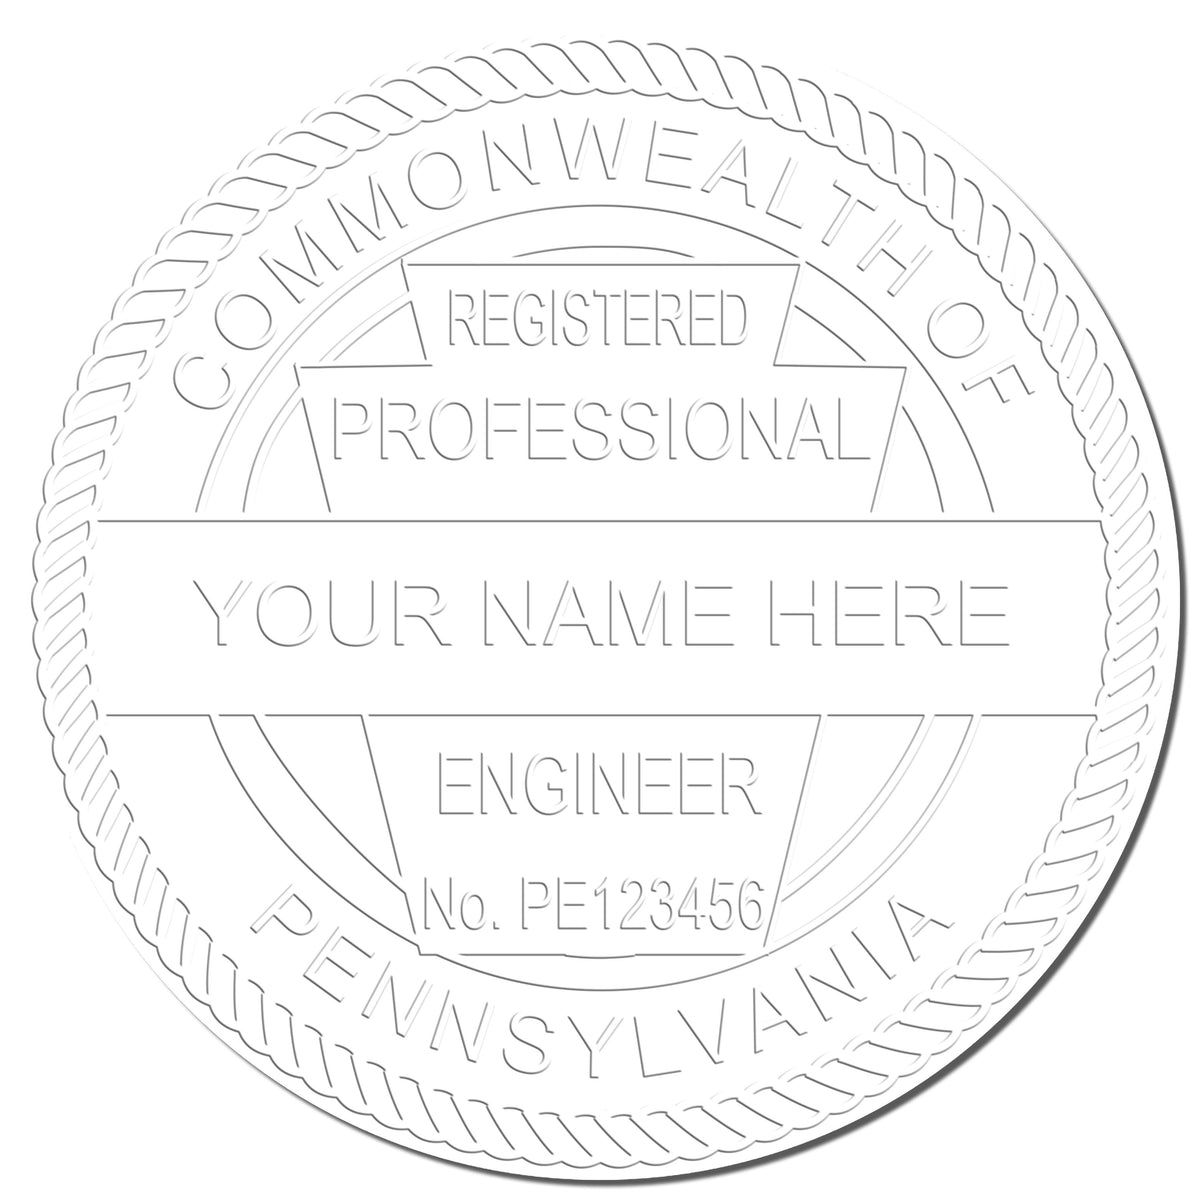 This paper is stamped with a sample imprint of the Heavy Duty Cast Iron Pennsylvania Engineer Seal Embosser, signifying its quality and reliability.